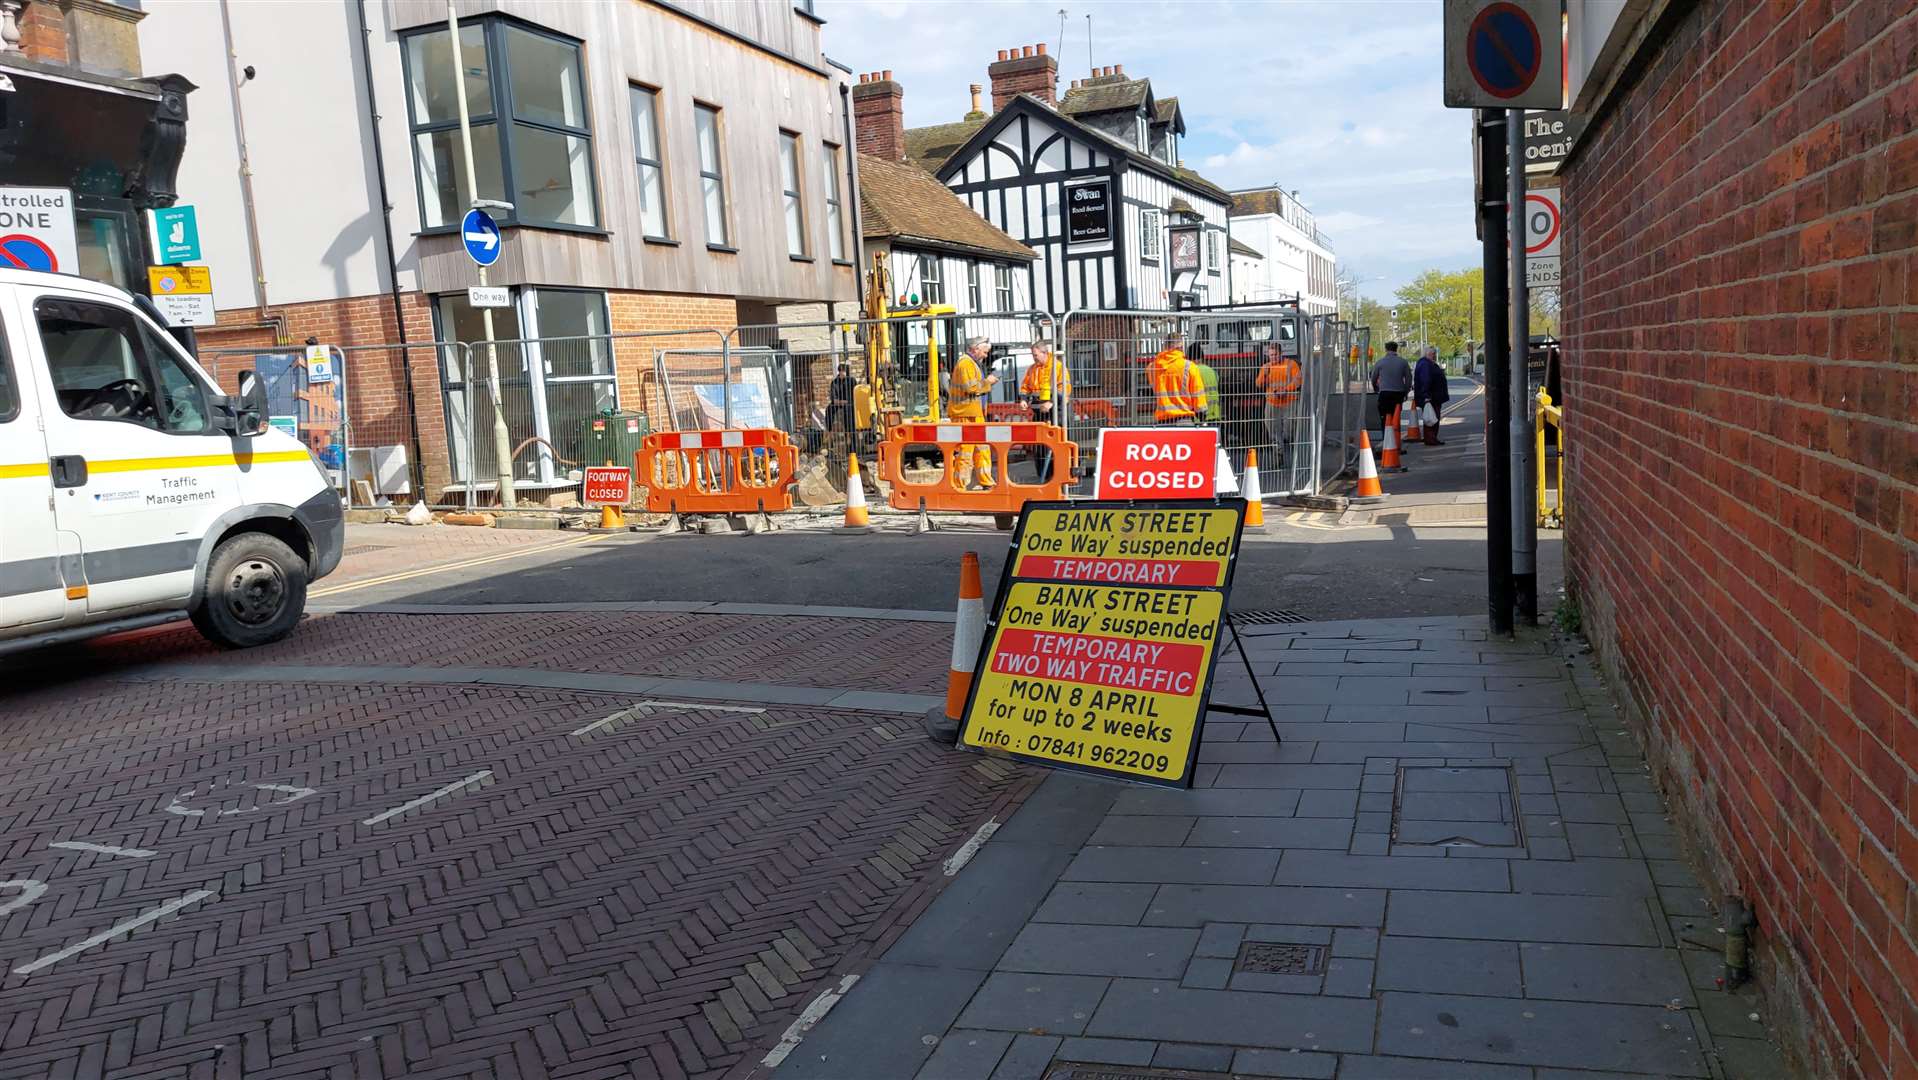 Sewer works have closed Tufton Street in Ashford for two weeks